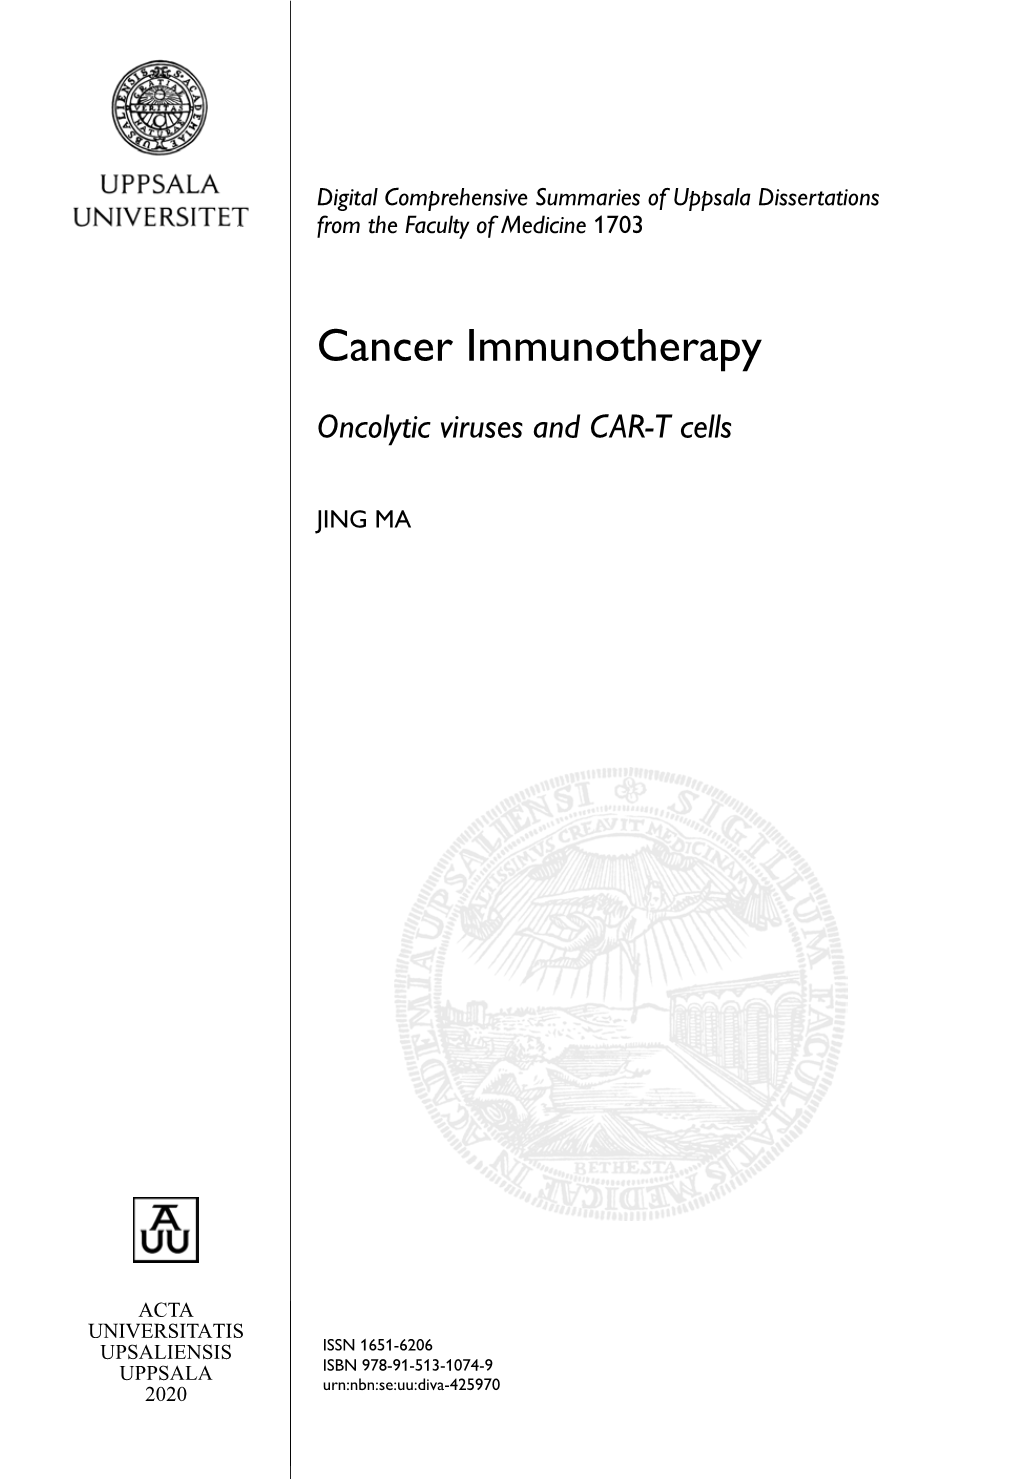 Cancer Immunotherapy. Oncolytic Viruses and CAR-T Cells